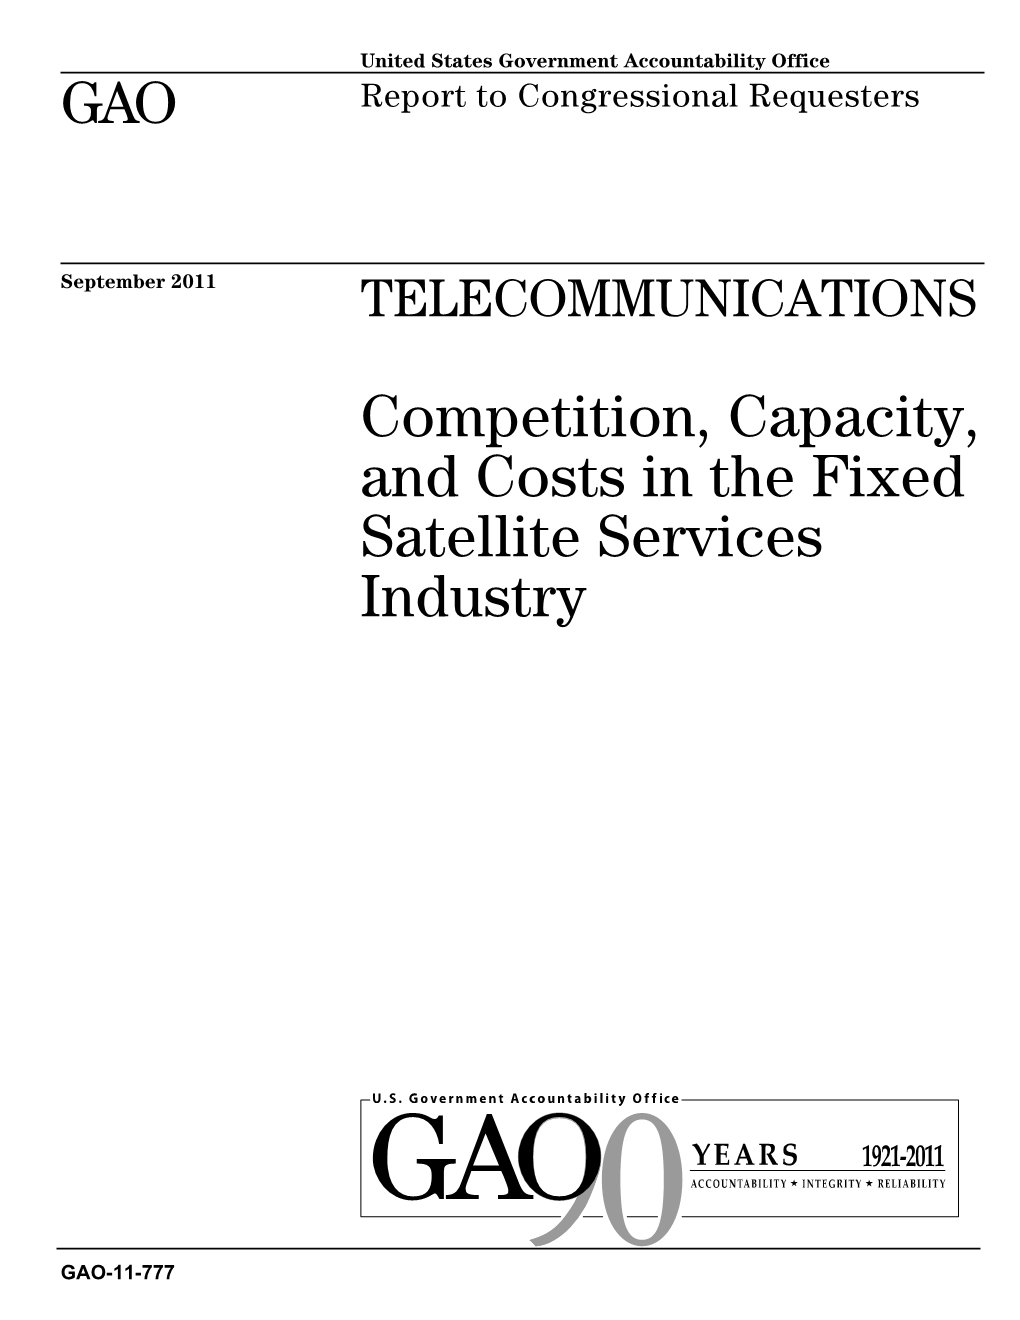 GAO-11-777 Telecommunications: Competition, Capacity, and Costs In